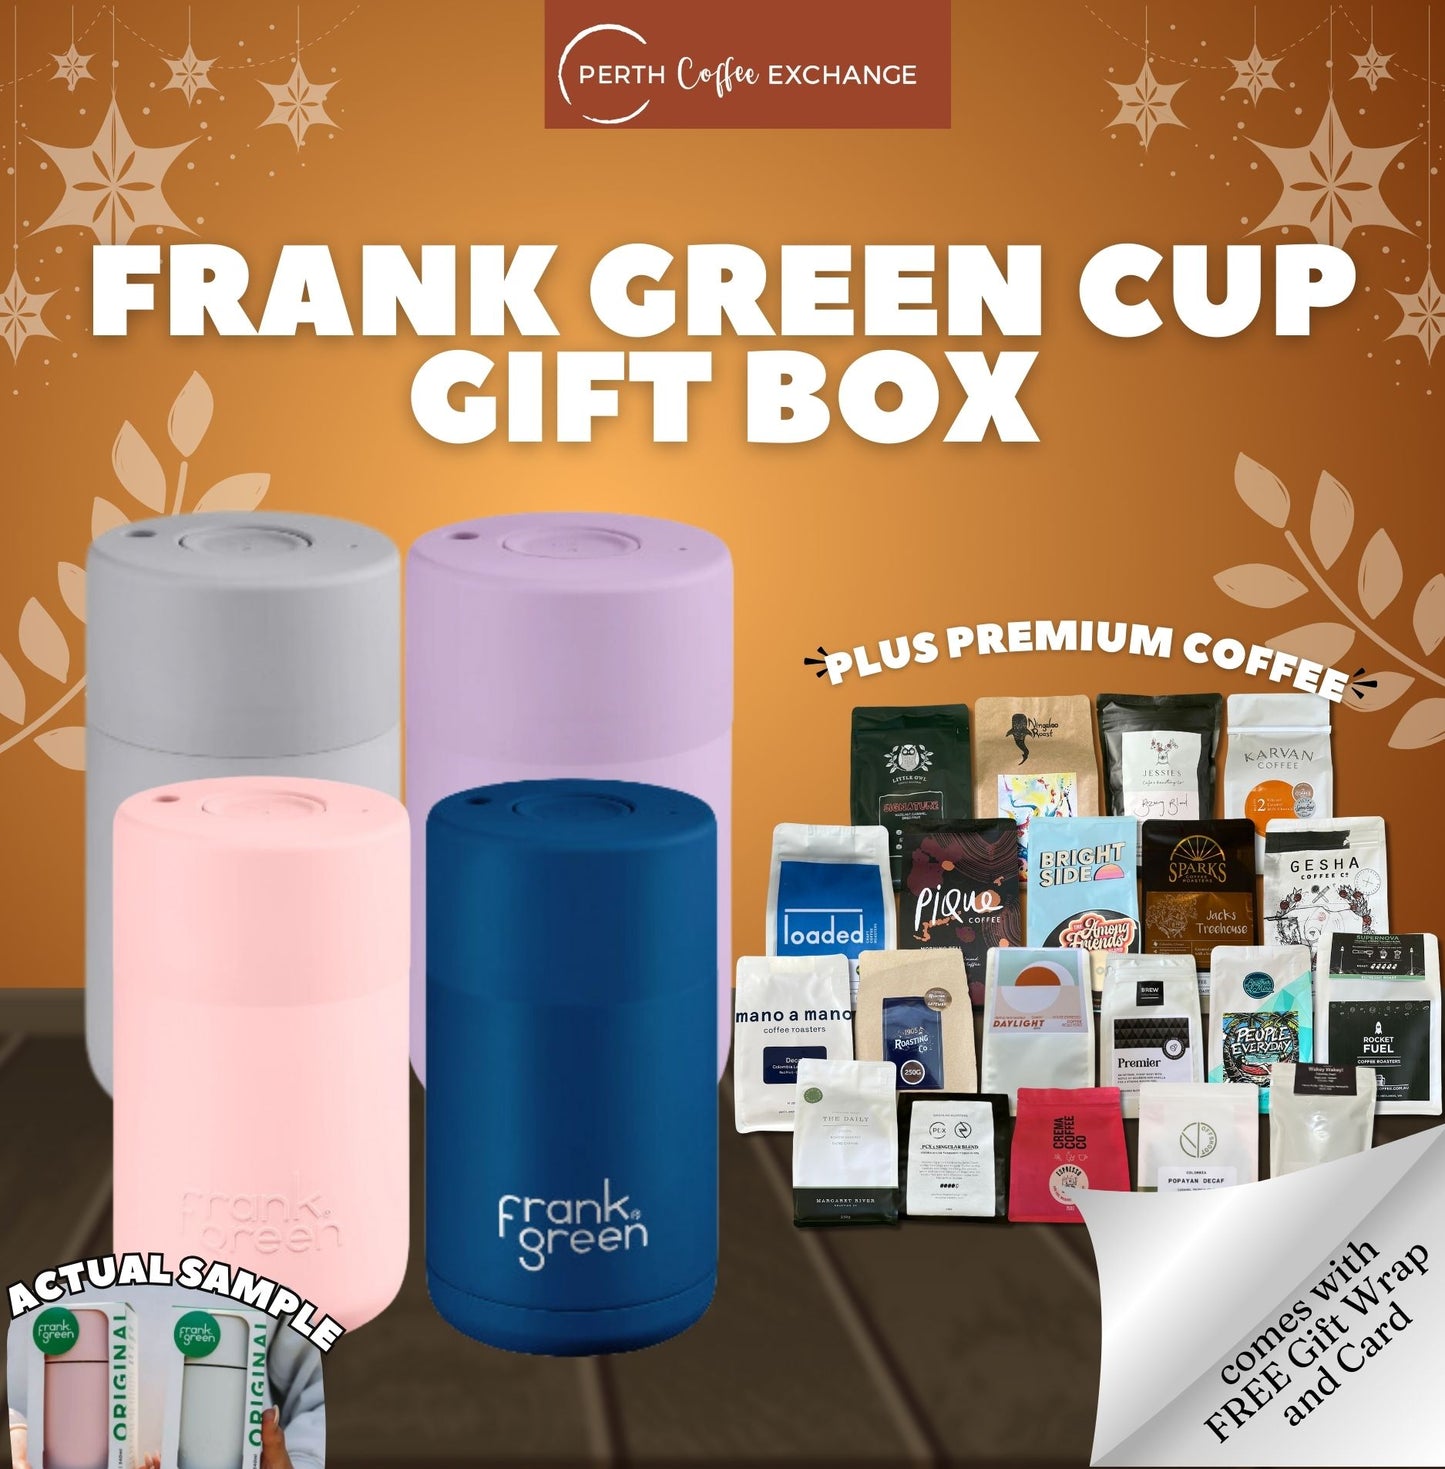 Frank Green Cup Gift Box with Premium Coffee Beans | Perth Coffee Exchange